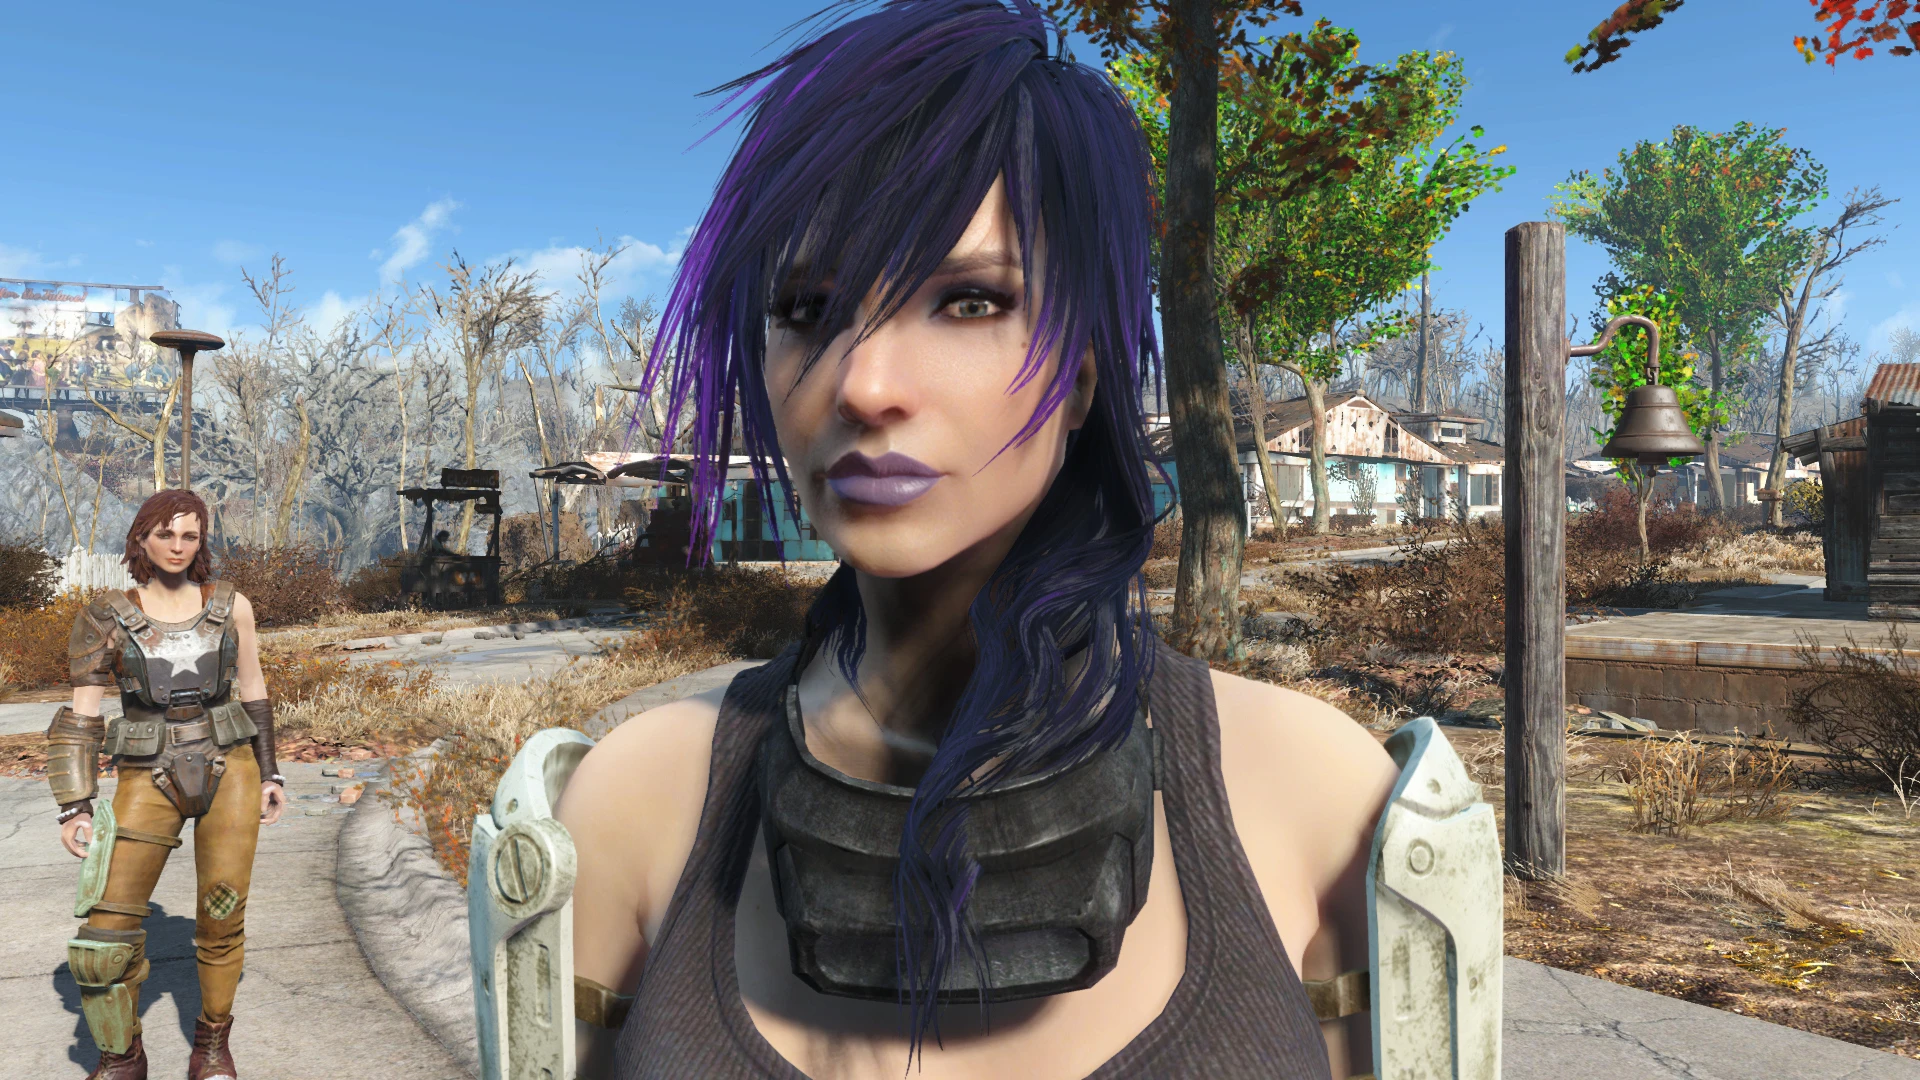 Misc Hairs For Fallout 4 By Atherisz - misc 4 at Fallout 4 Nexus - Mods